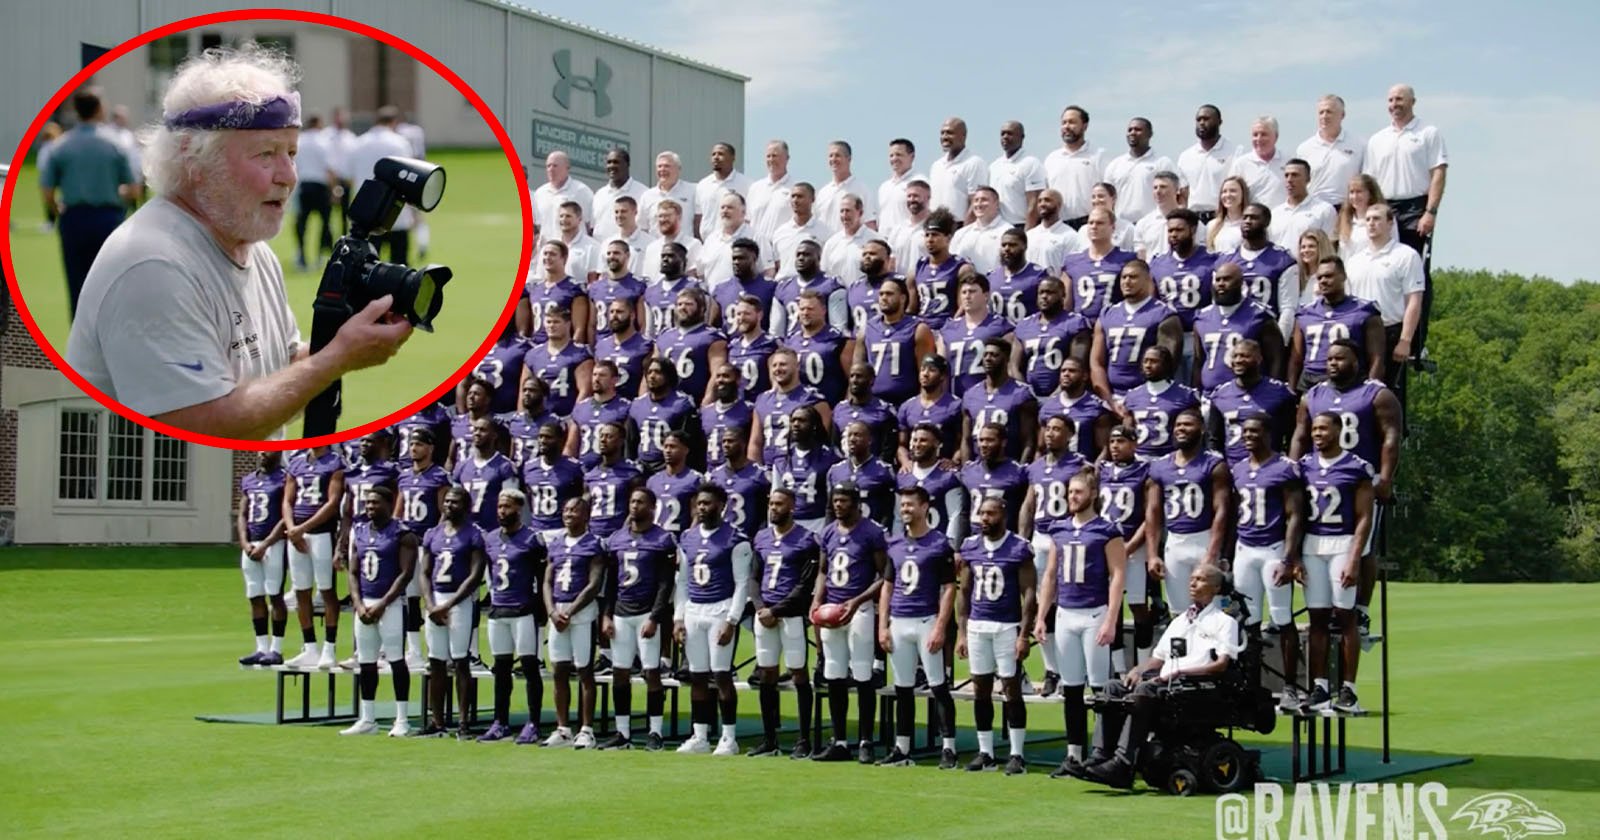  baltimore ravens mic their photographer during chaotic team 